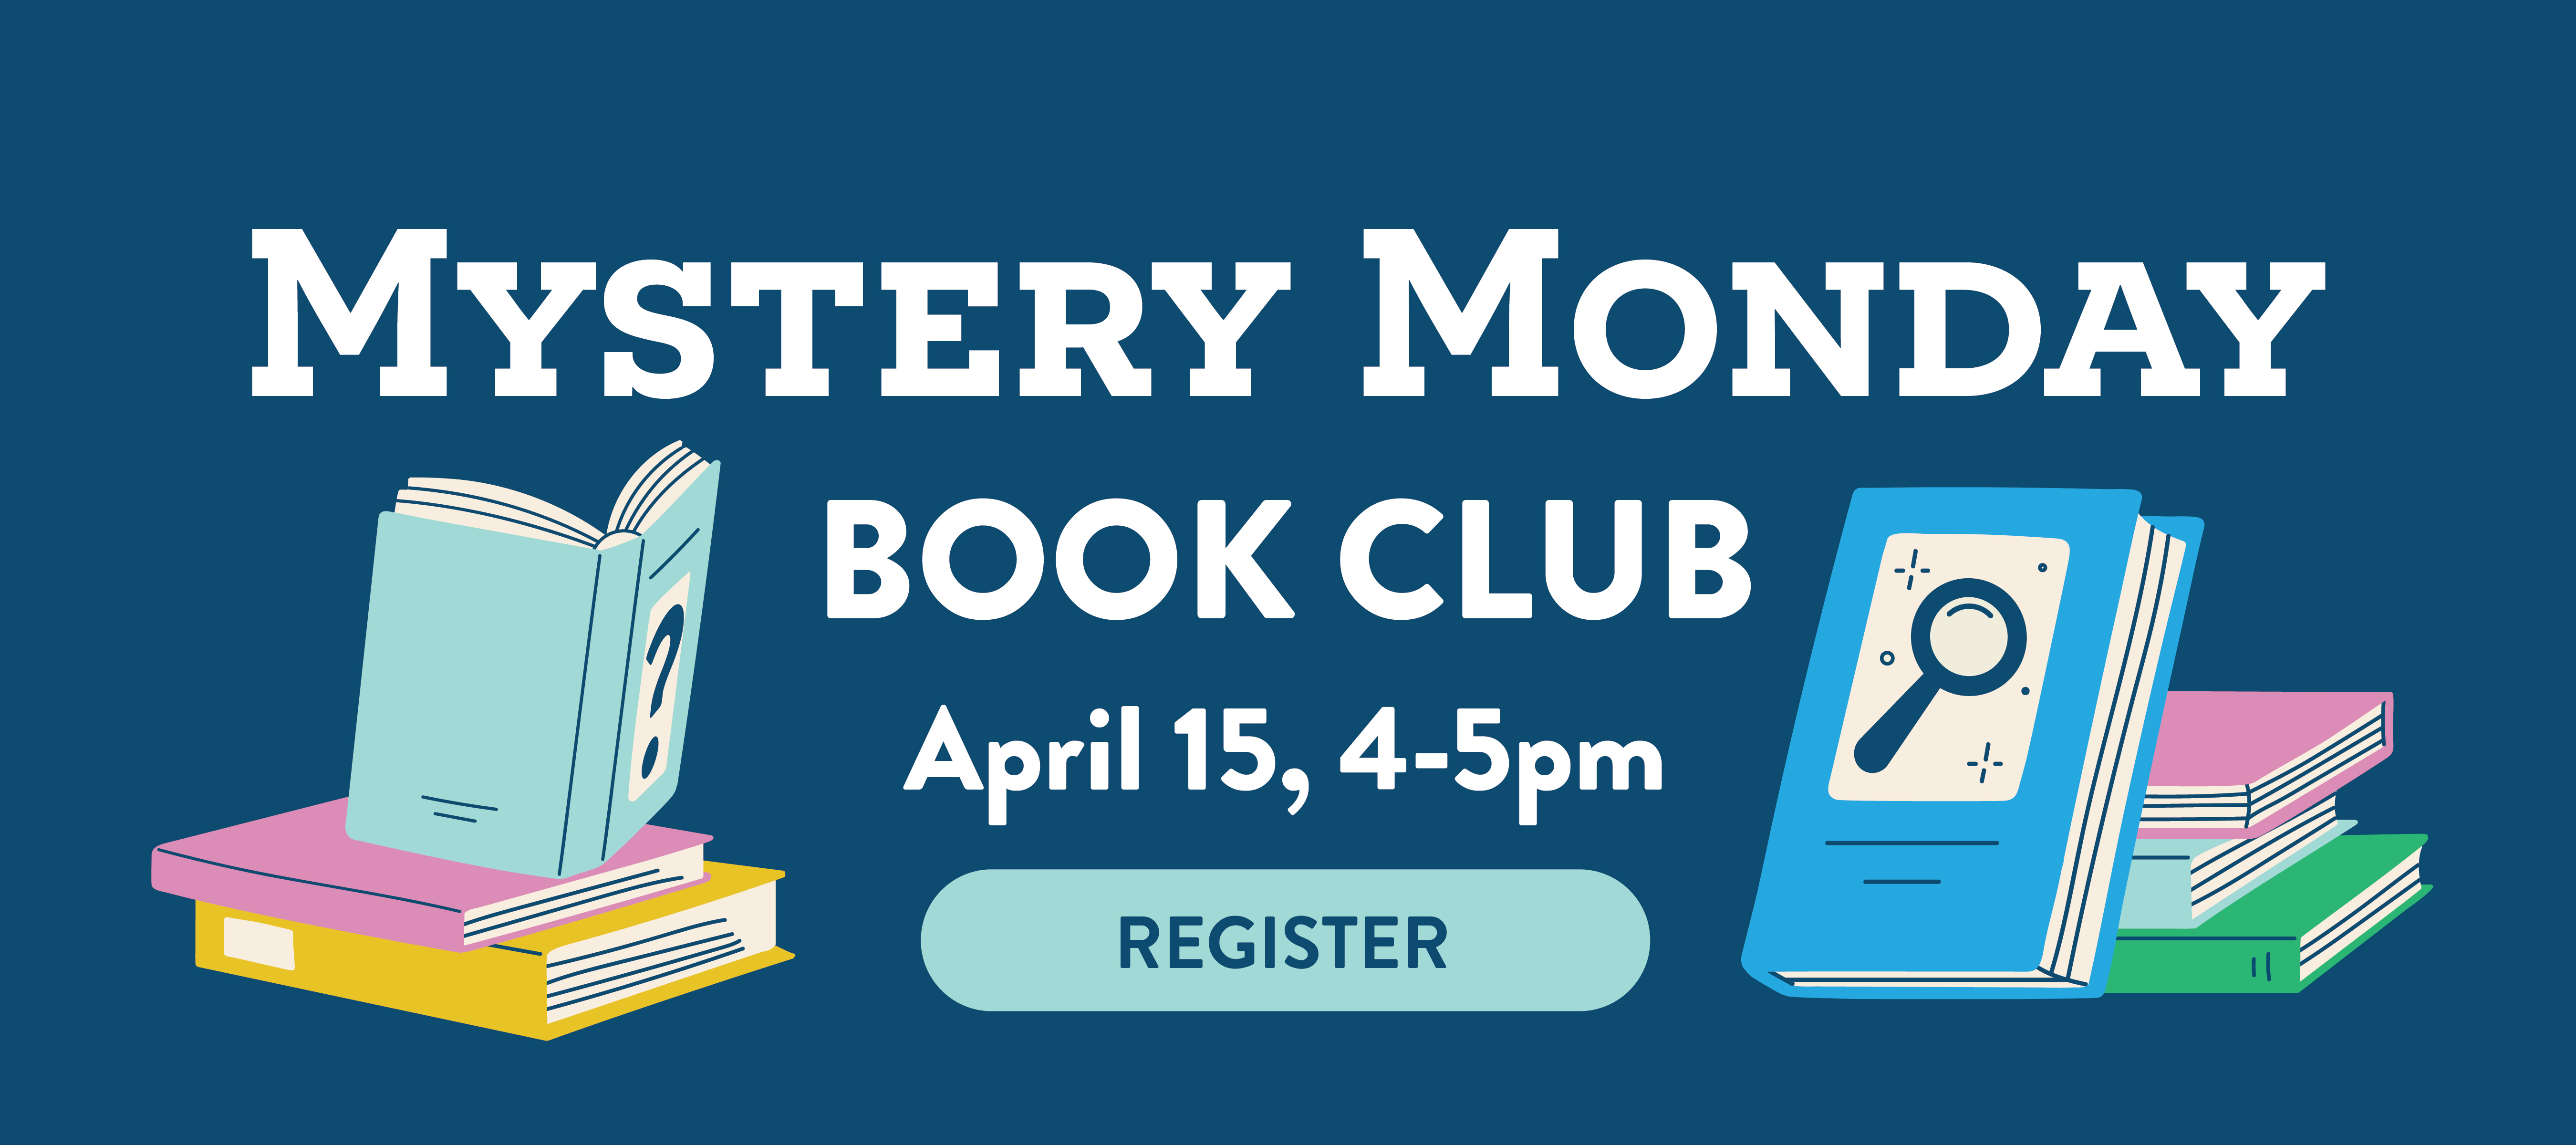 phpl, prospect heights public library, Mystery Monday Book Club, Youth